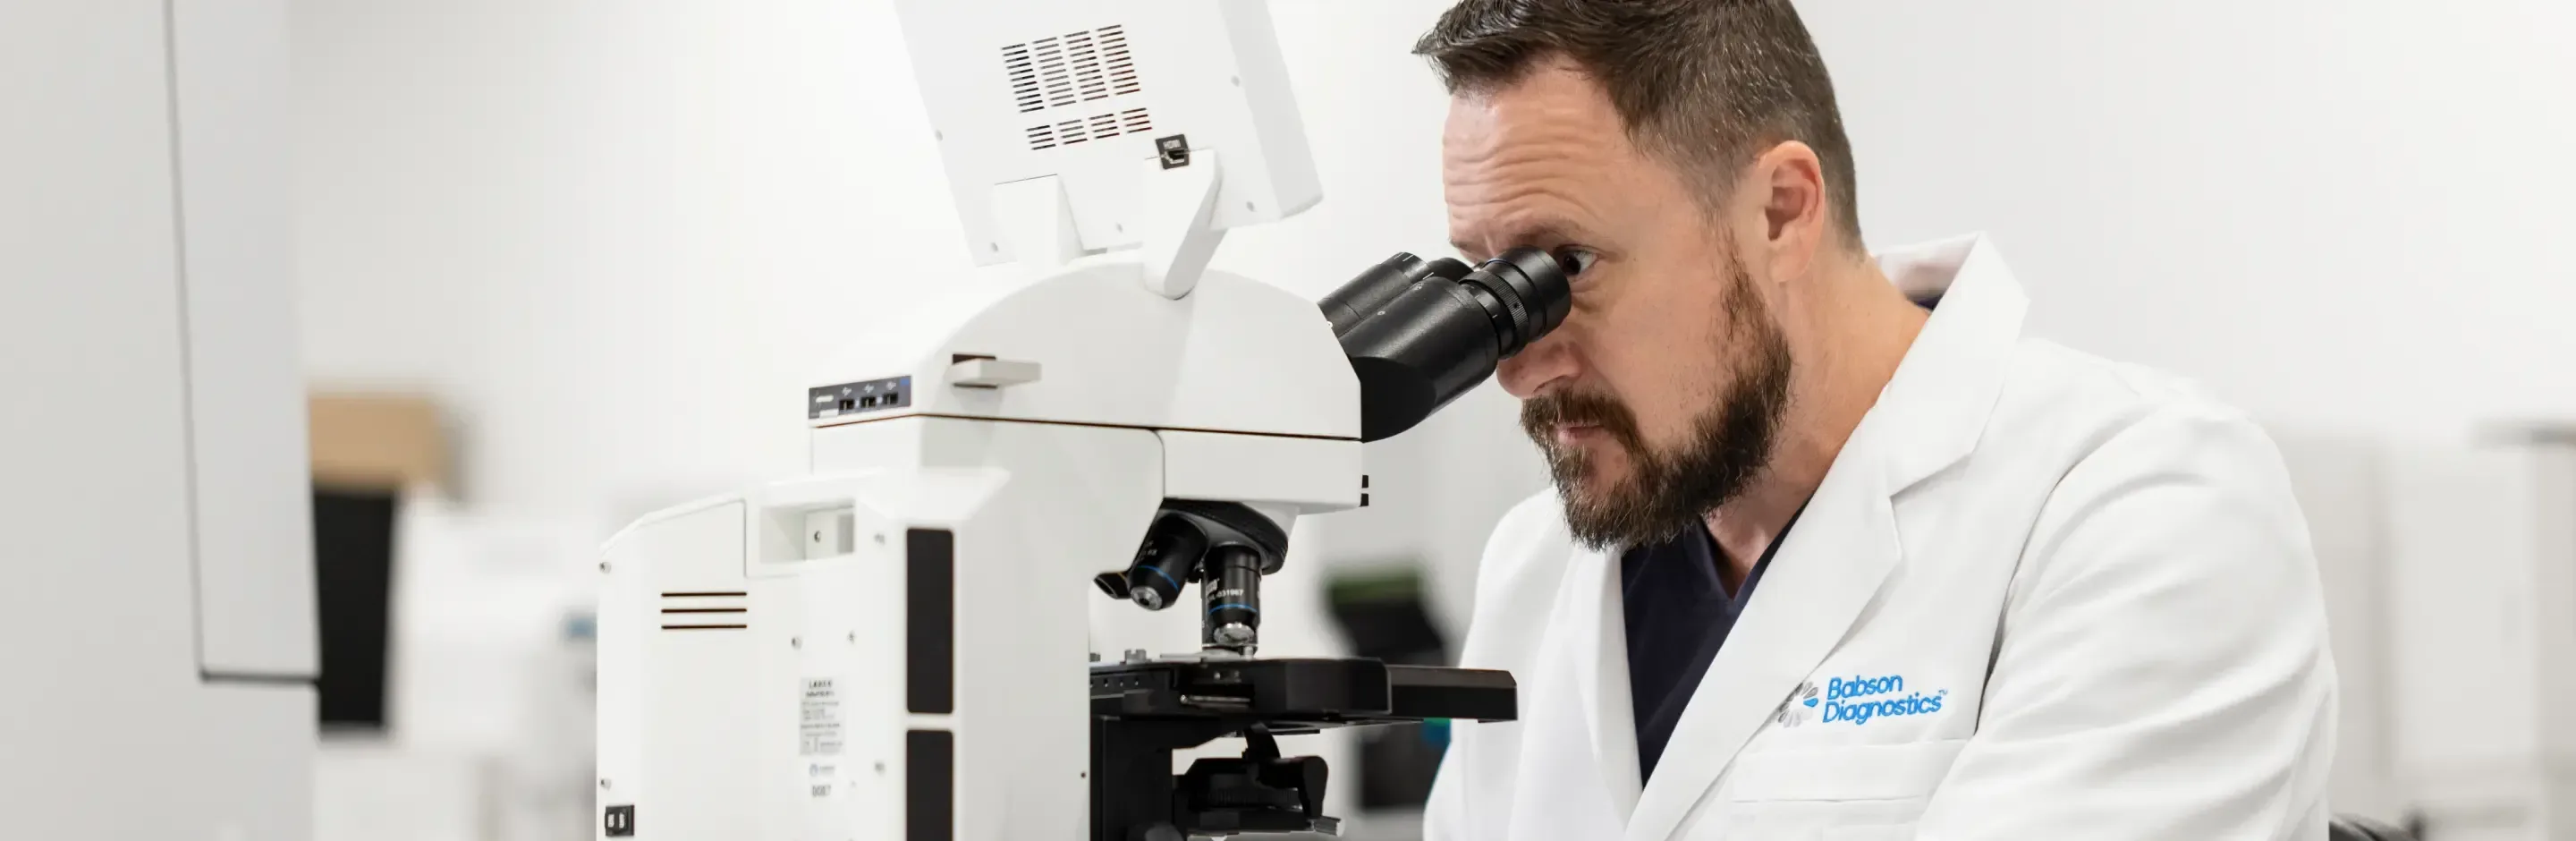 scientist looking through a microscope